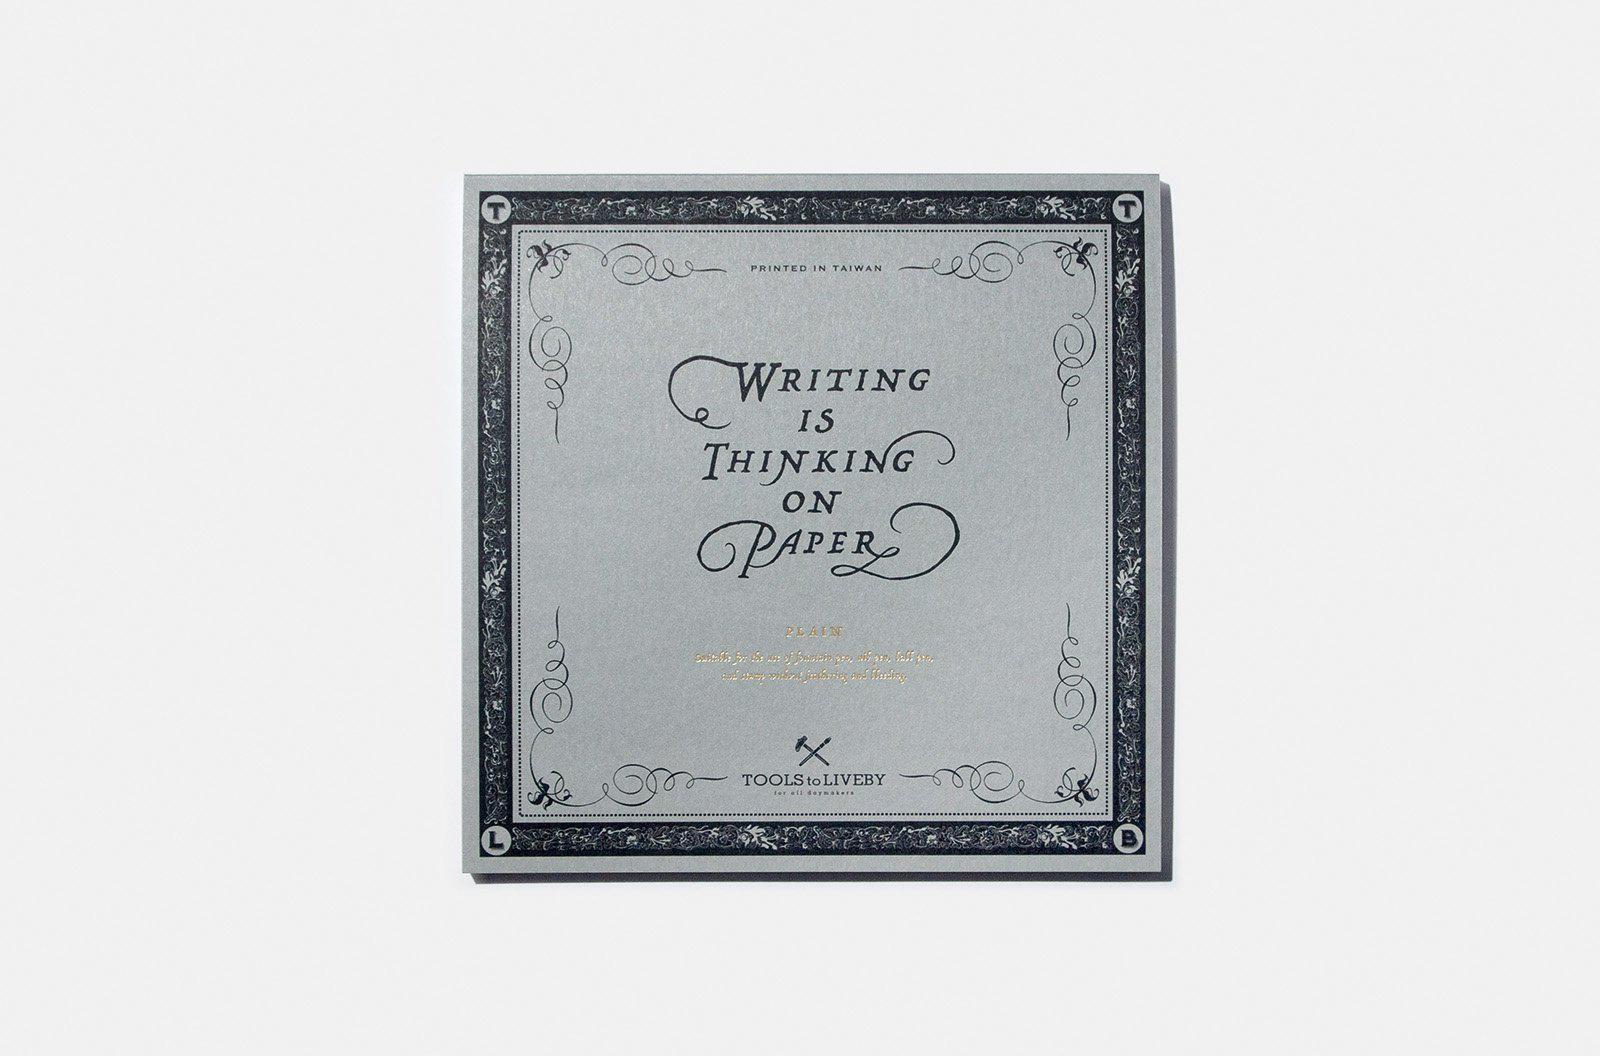 Calligraphy Practice Paper - Delicate Texture for Better Mastery – CHL-STORE